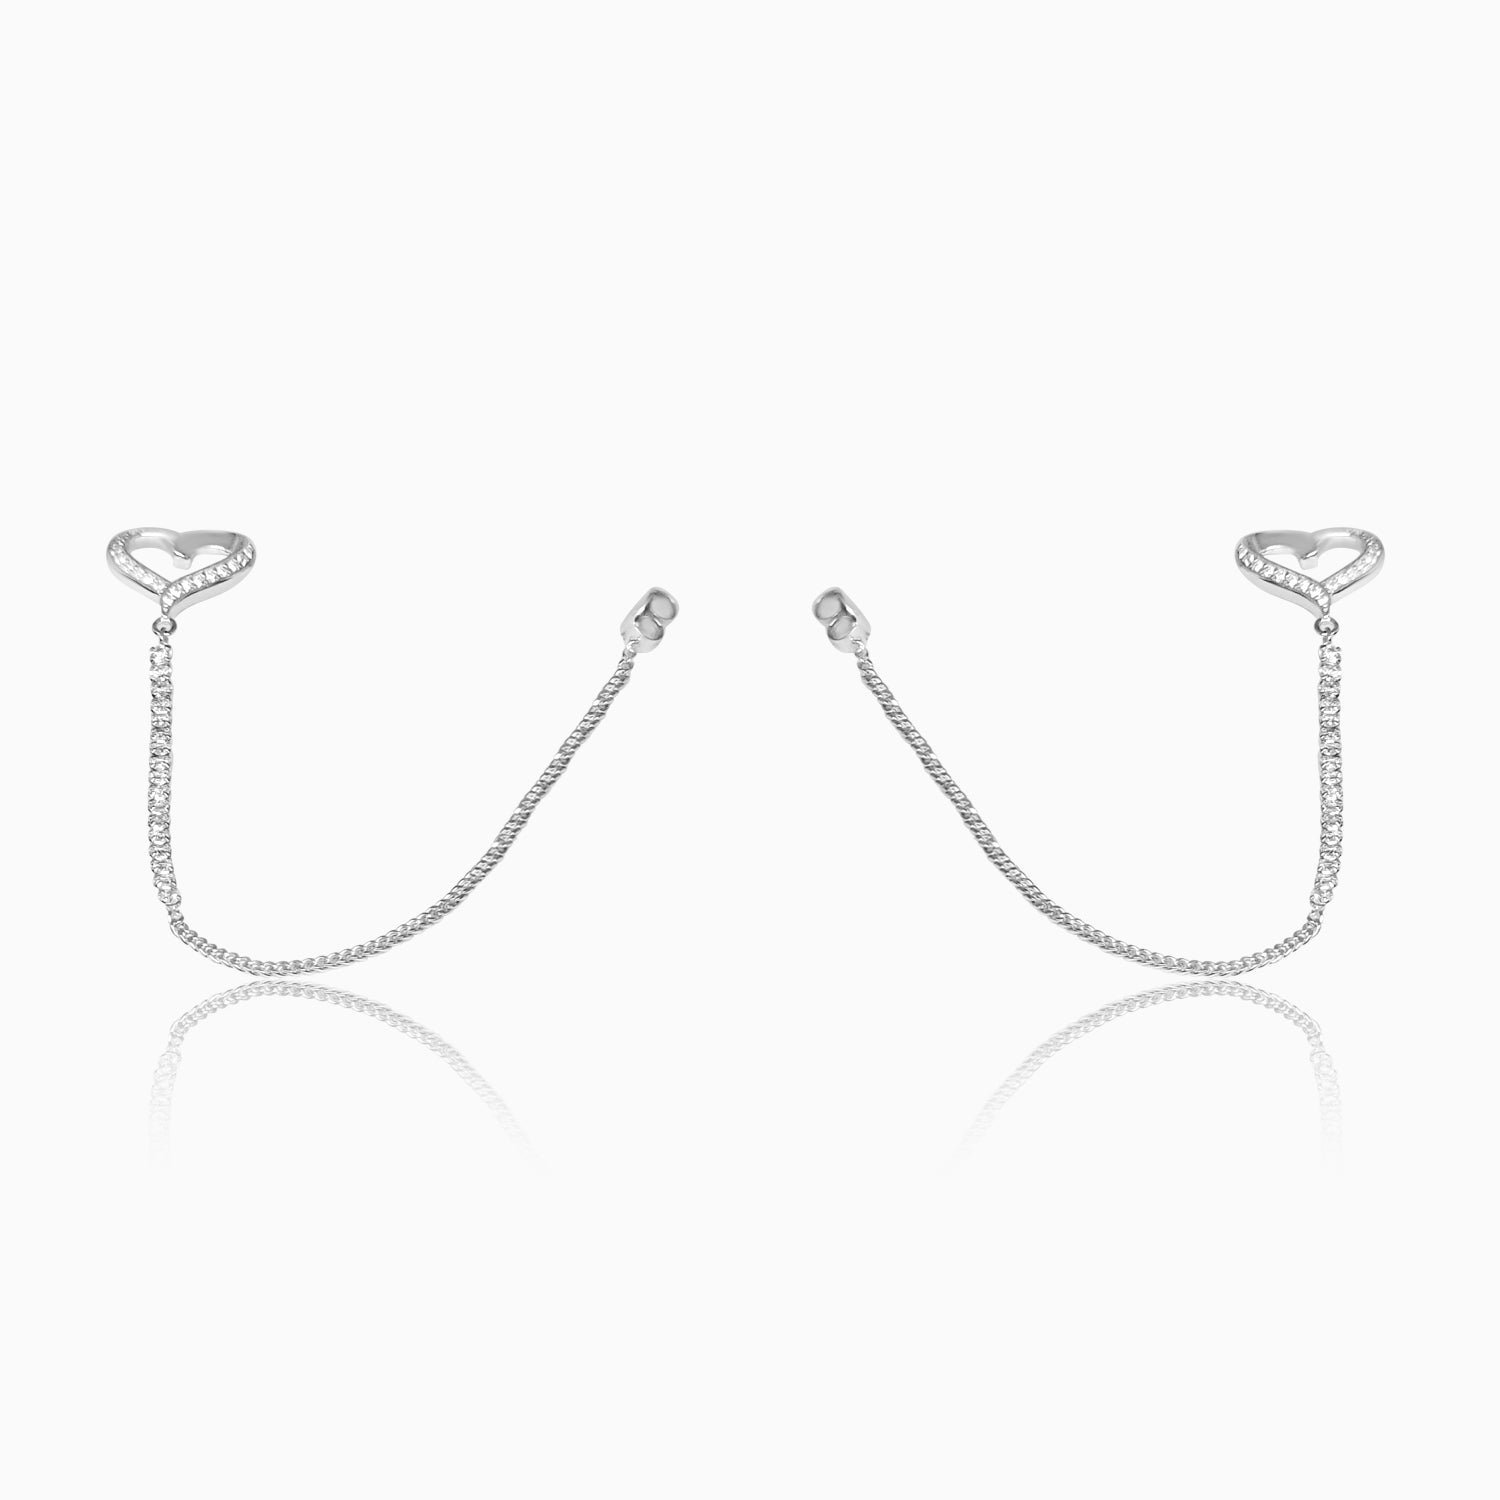 Silver Sparkling Heart with Dangling Chain Earrings